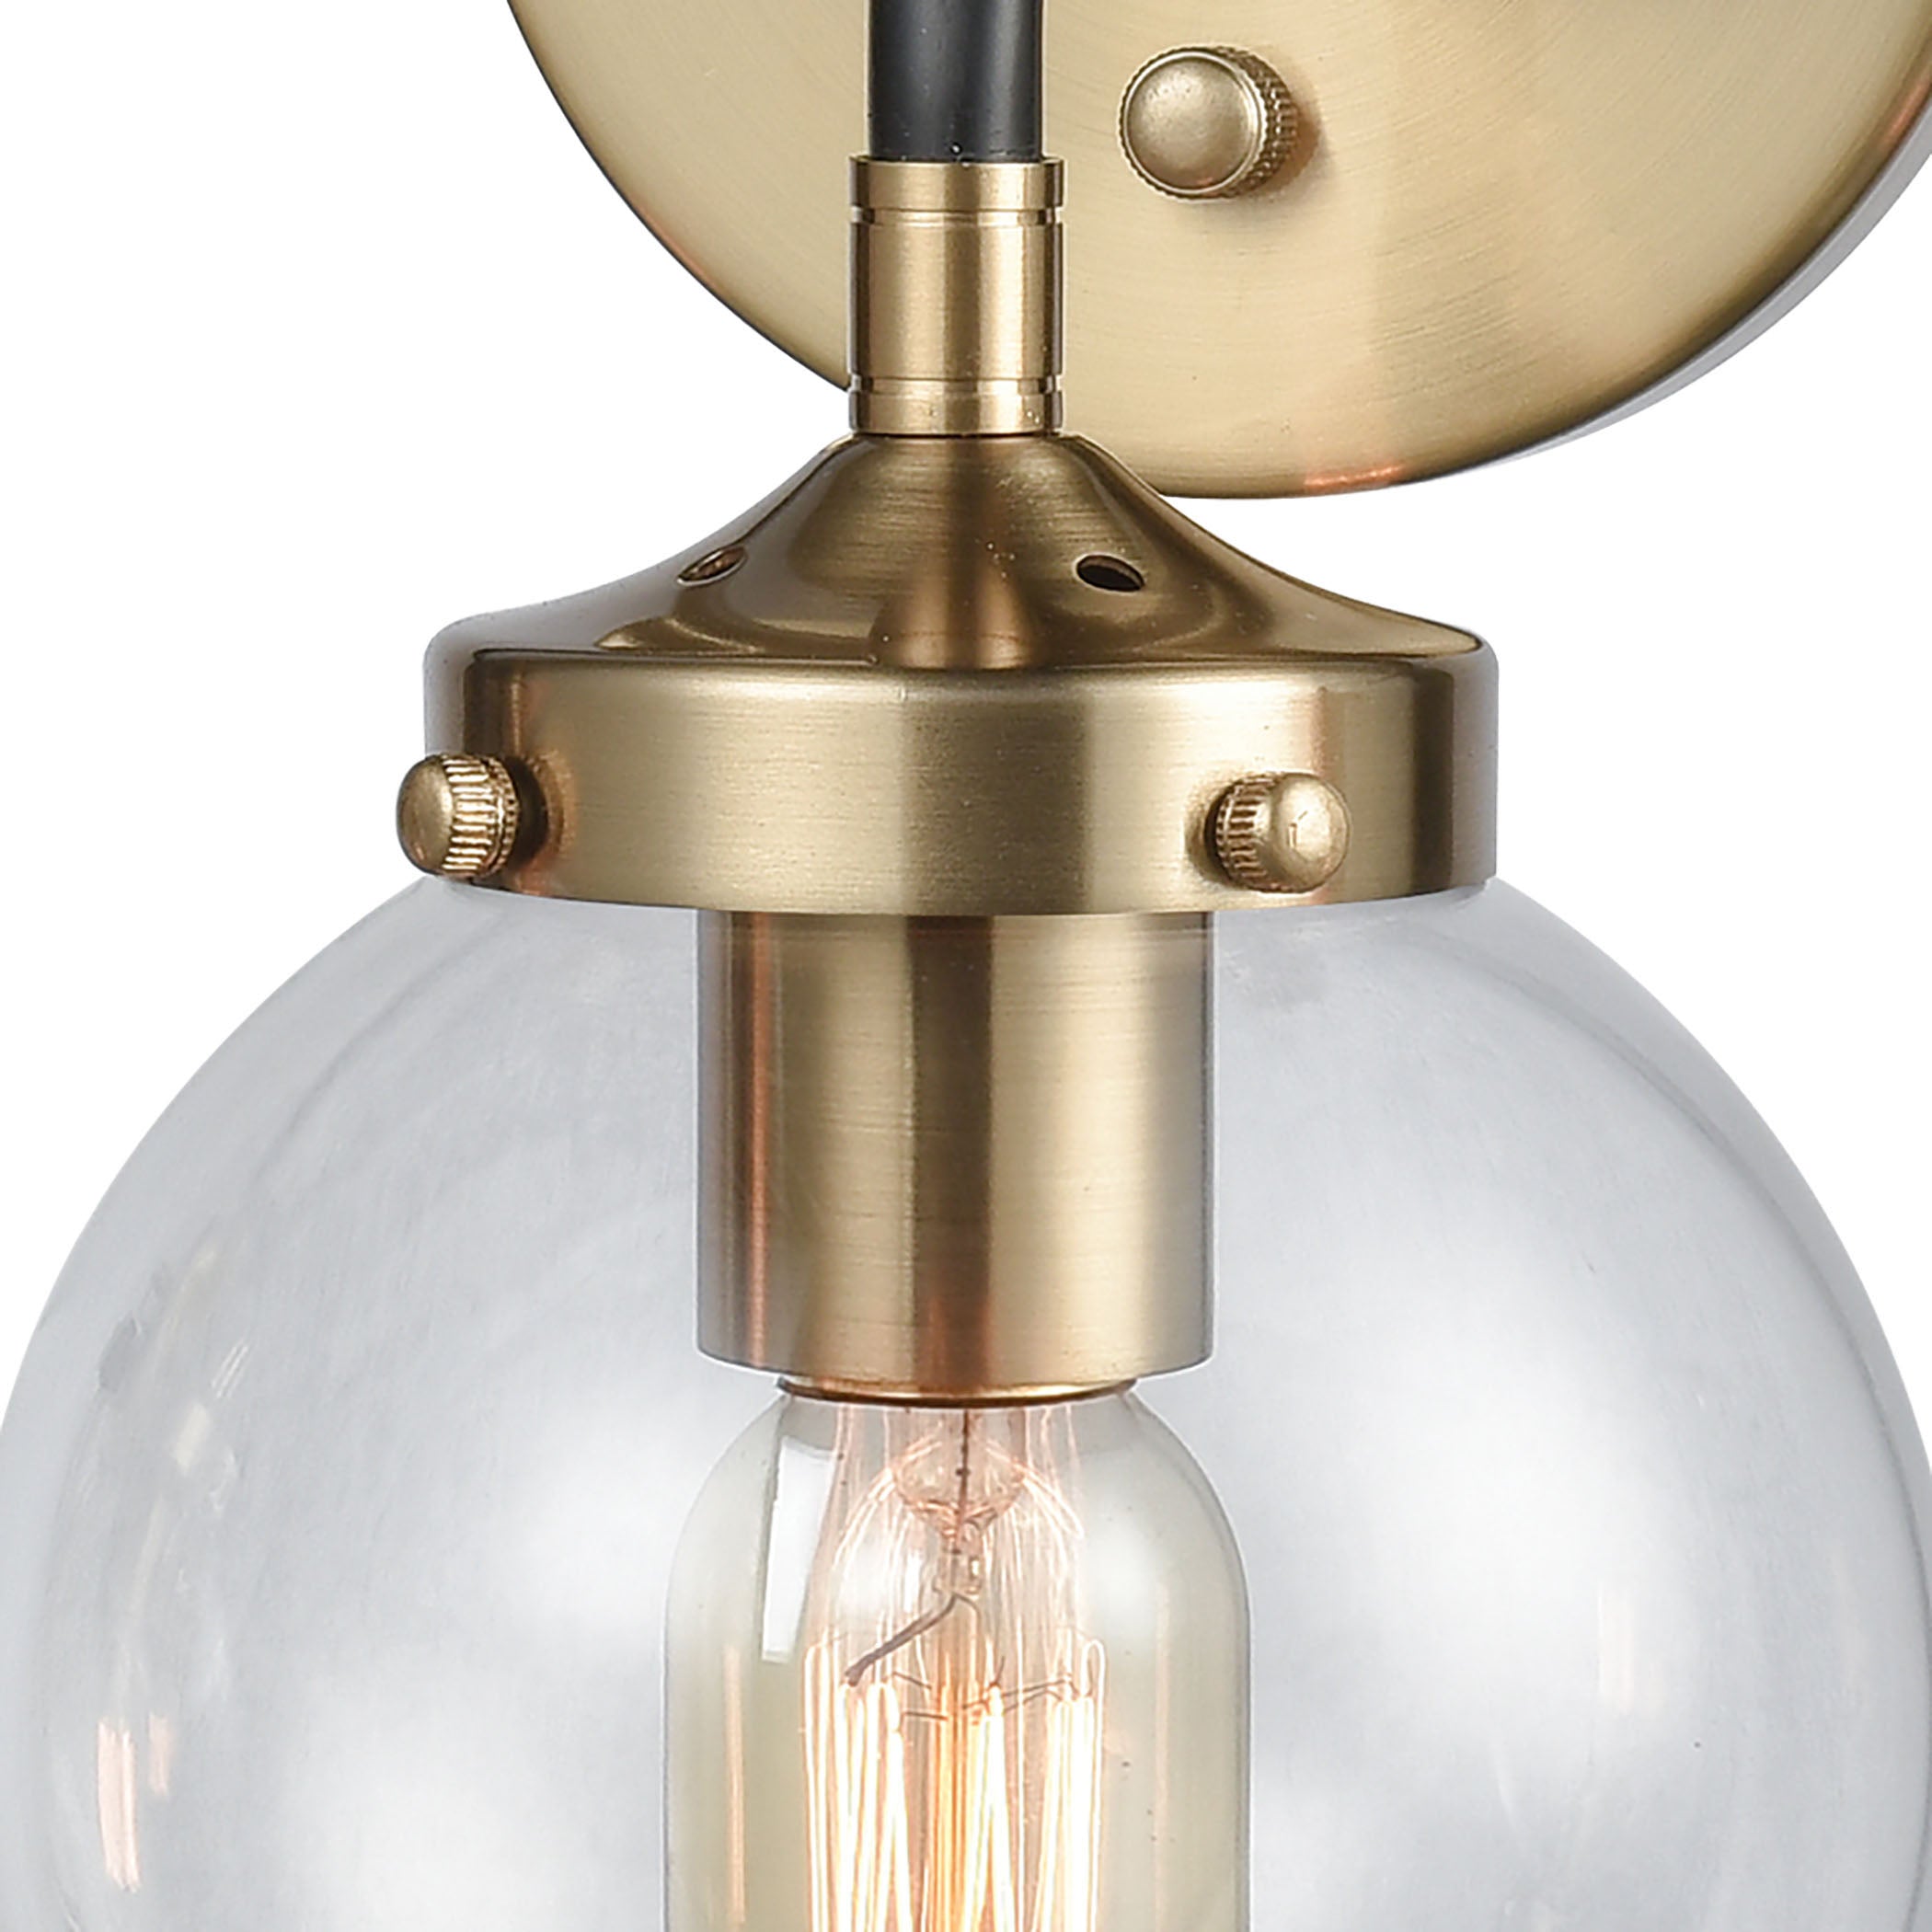 ELK Lighting 14428/3 Boudreaux 3-Light Vanity Lamp in Matte Black and Antique Gold with Sphere-shaped Glass